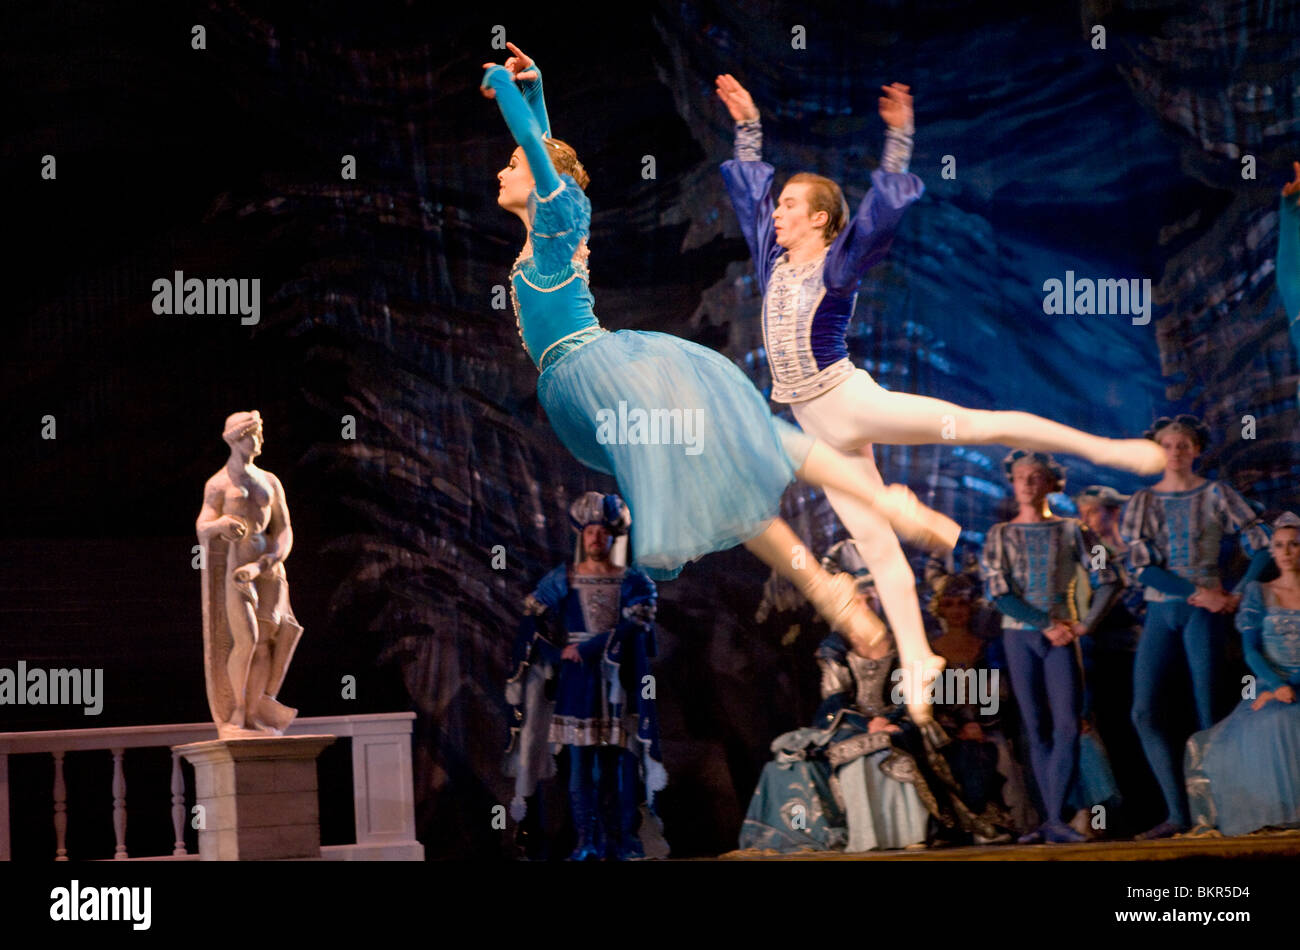 Russia; St.Petersburg; Dancers doing a jump during a performance of Tchaikovsky's 'Swan Lake' Stock Photo